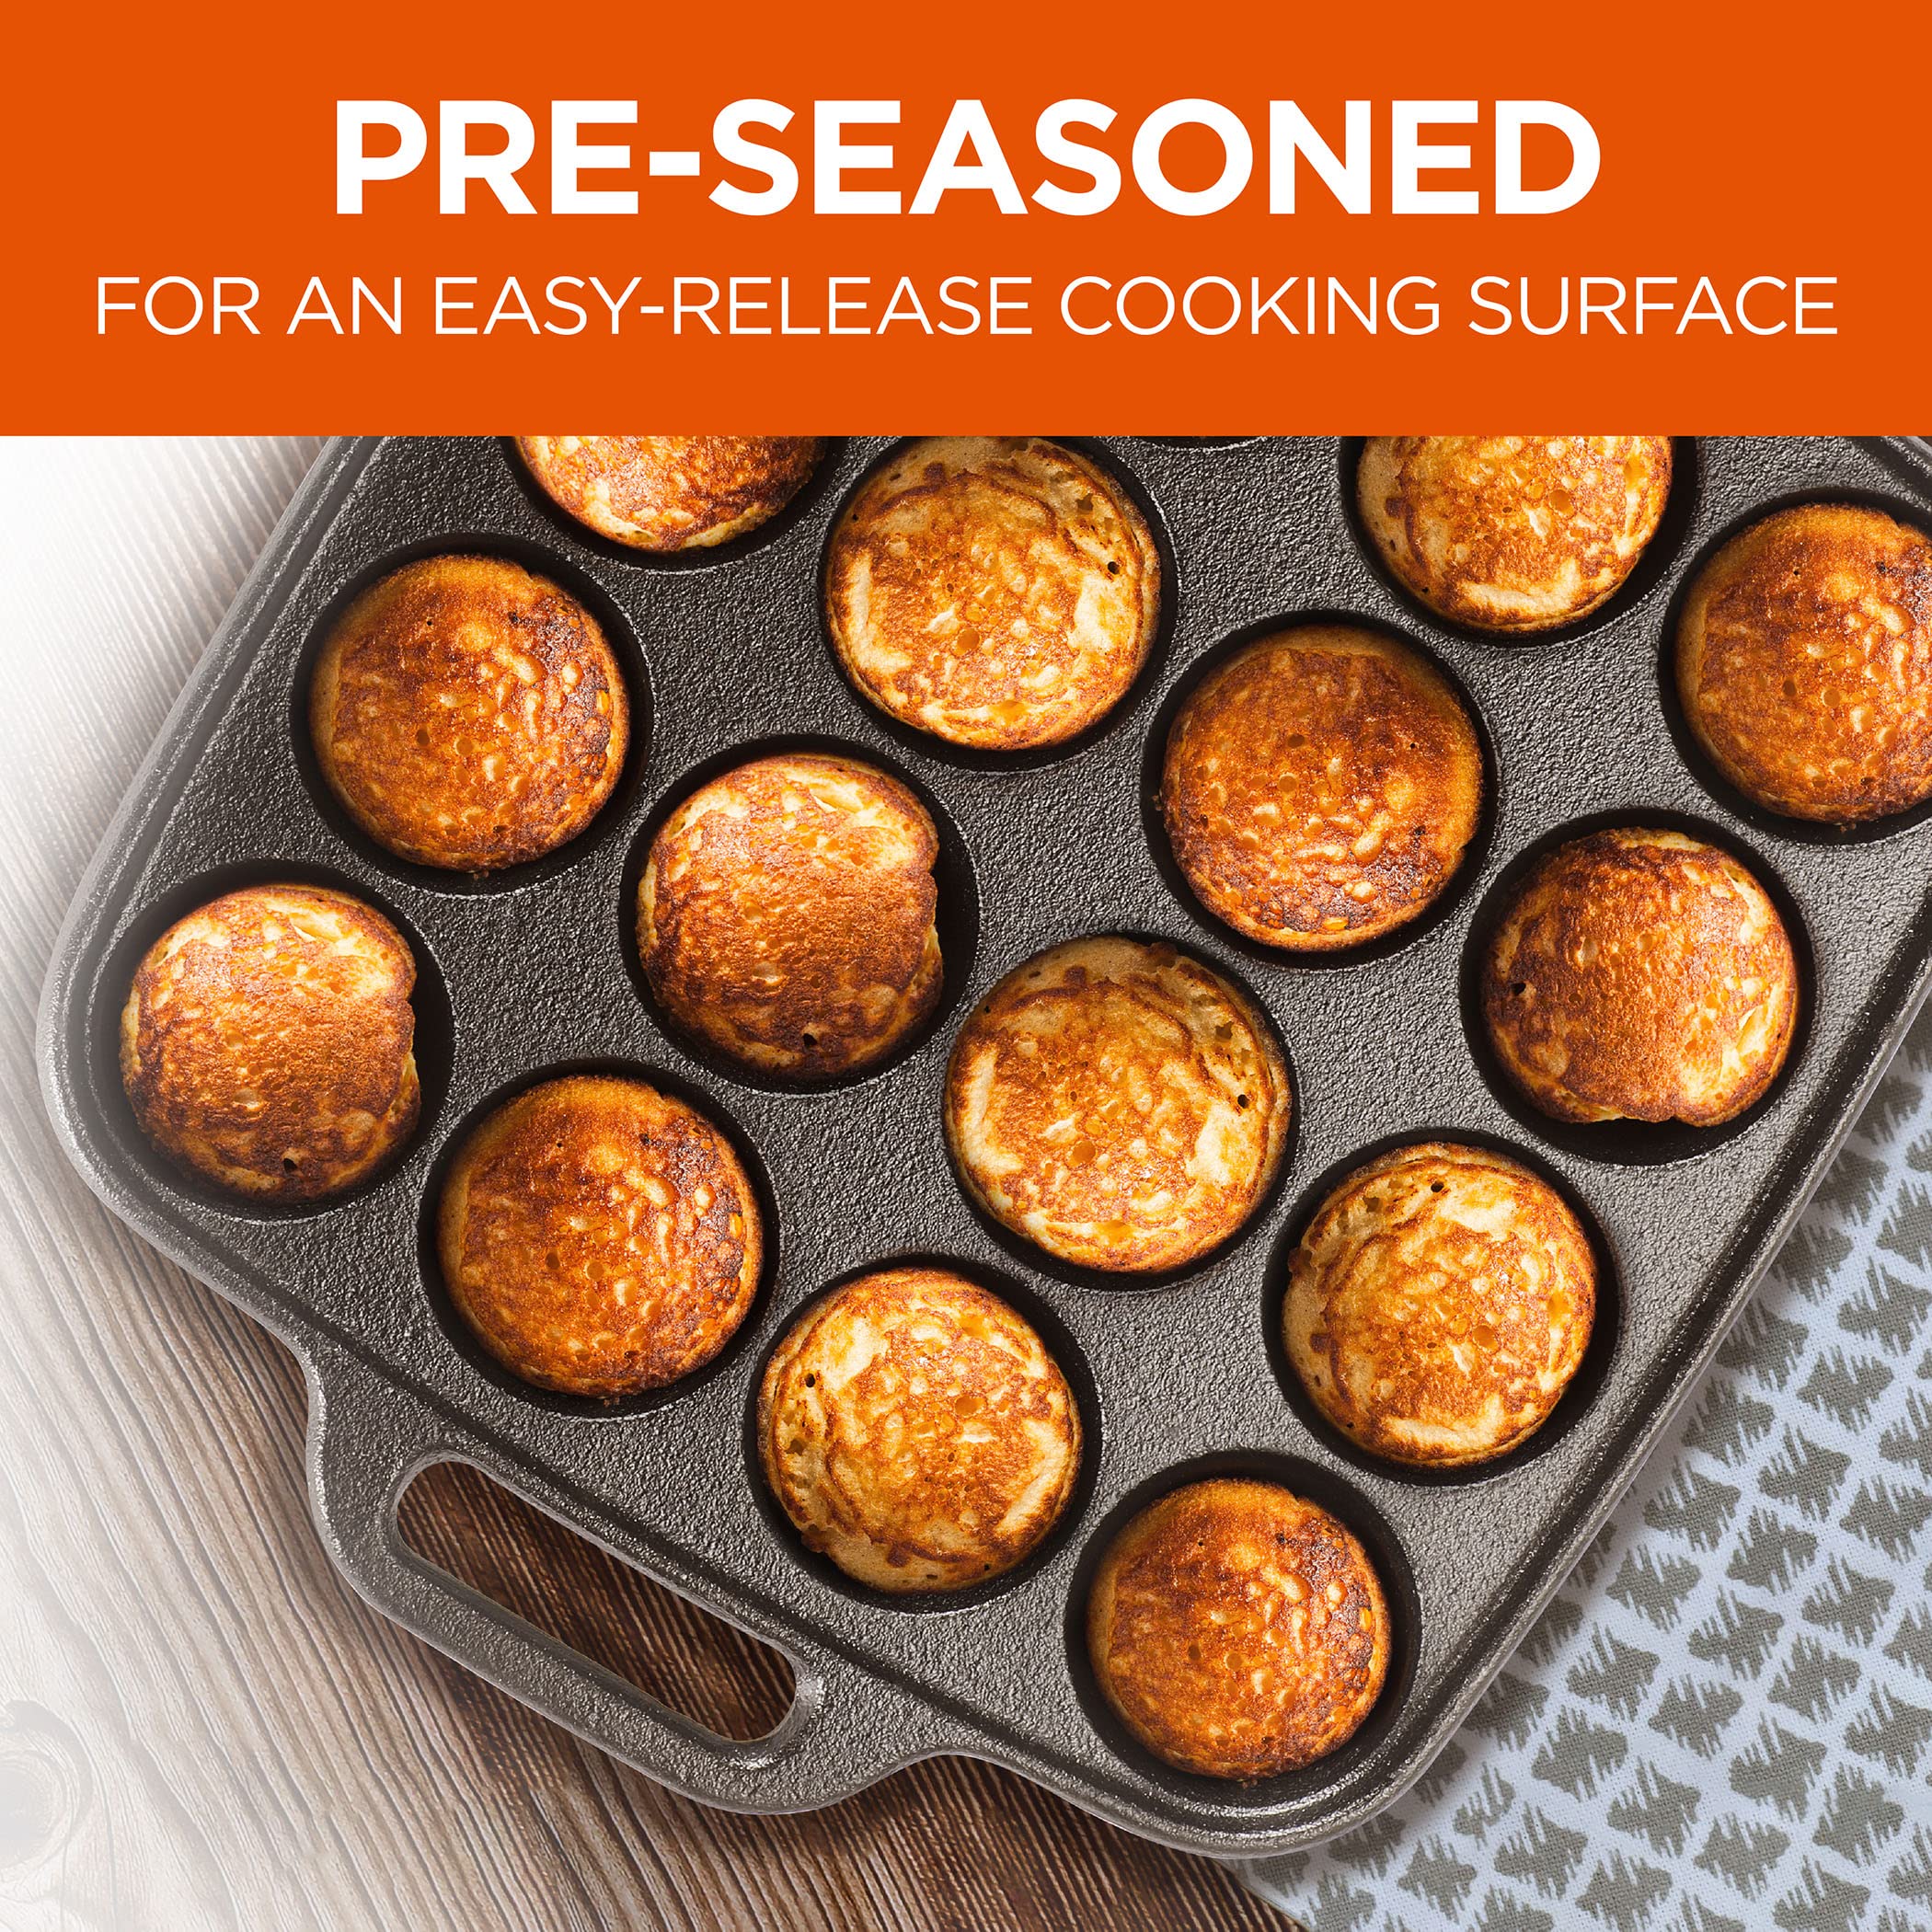 Commercial CHEF Cast Iron Cookware Aebleskiver Pan with 16 Cake Pop Mold Openings, Cast Iron Donut Pan for Baking with Handles, Enameled Cast Iron with Even Heat Retention